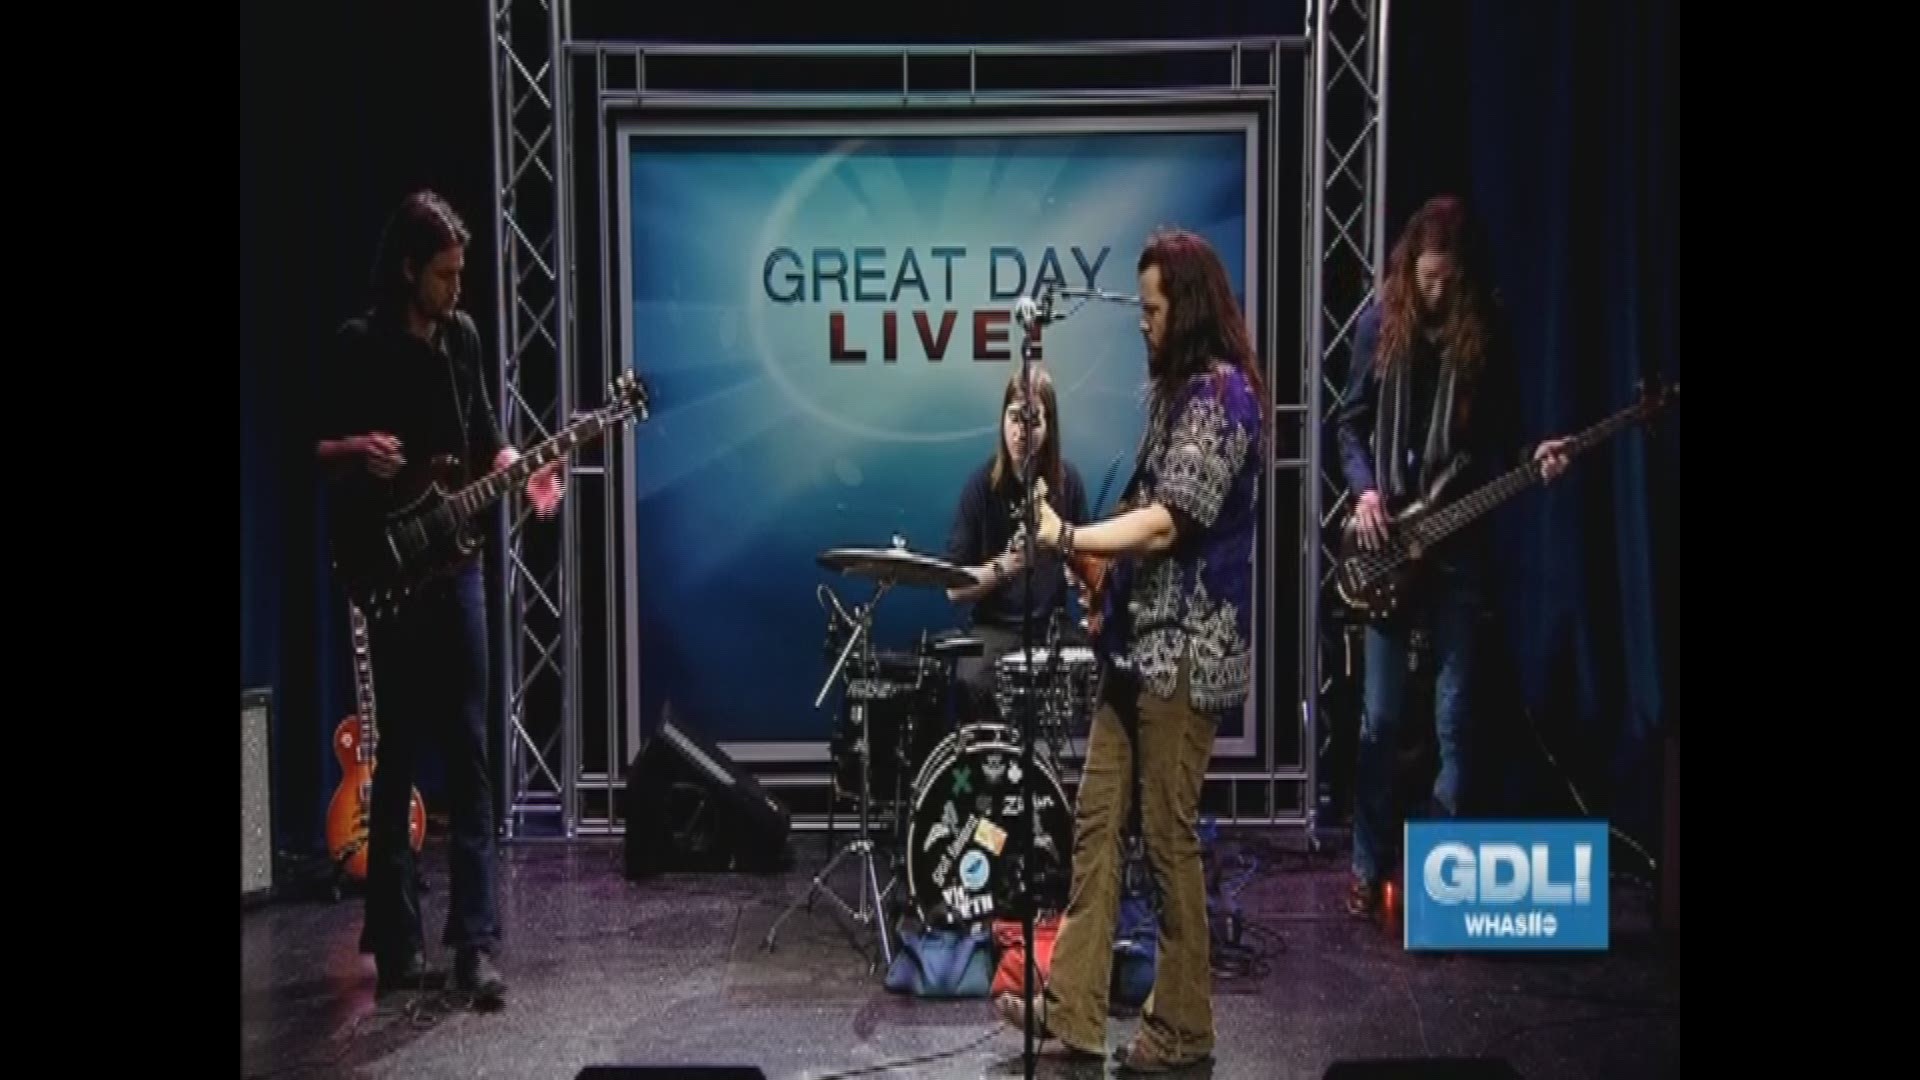 The band MOJOTHUNDER stopped by Great Day Live to perform.